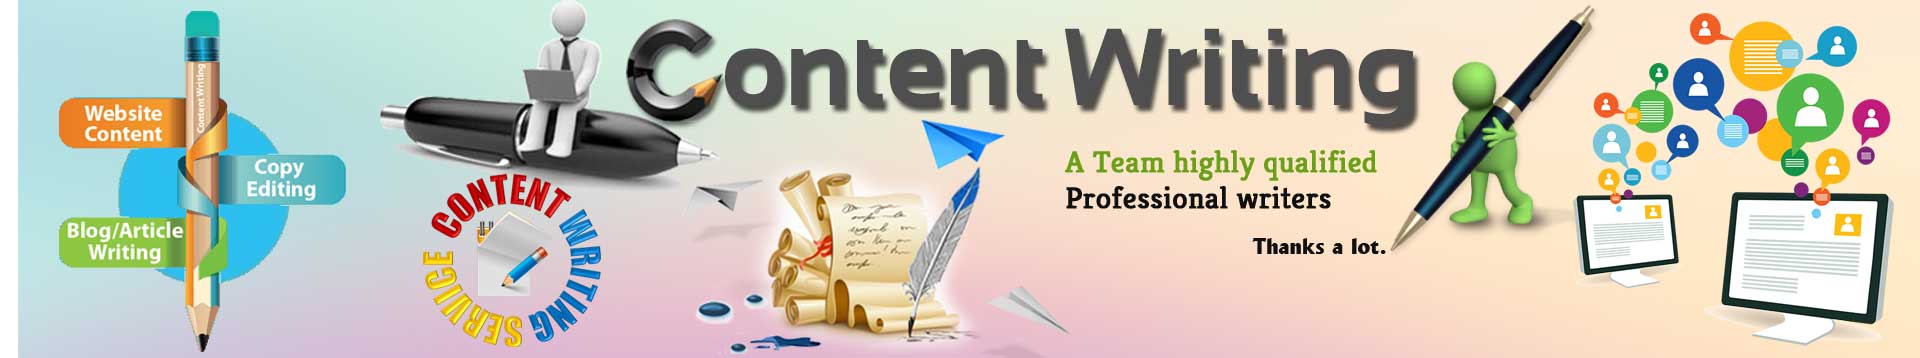 Content writing services packages